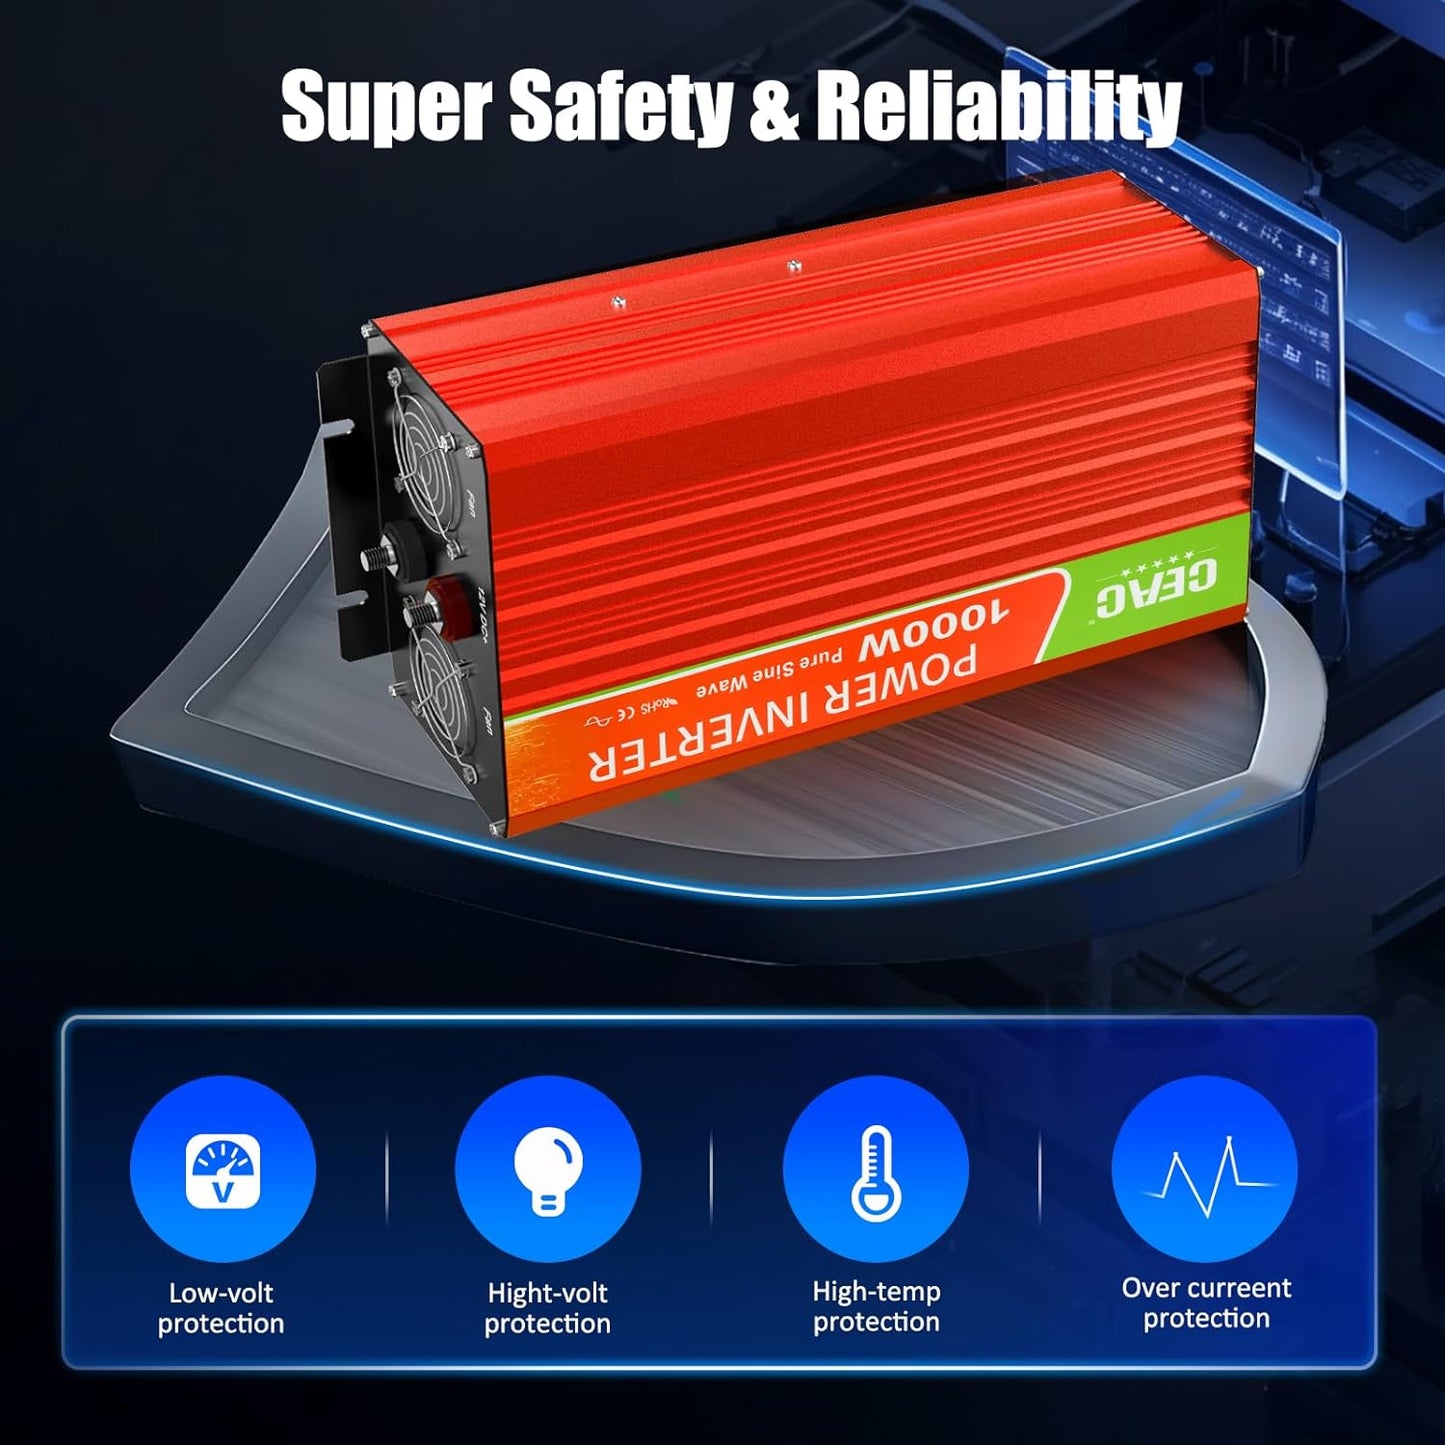 1000W Pure Sine Wave Inverter 12V DC to 110V AC Converter with Lightning, USB Data Cable for Home,RV,Truck,Camping with Built-in 5V/2.4A USB, AC Hardwire Port